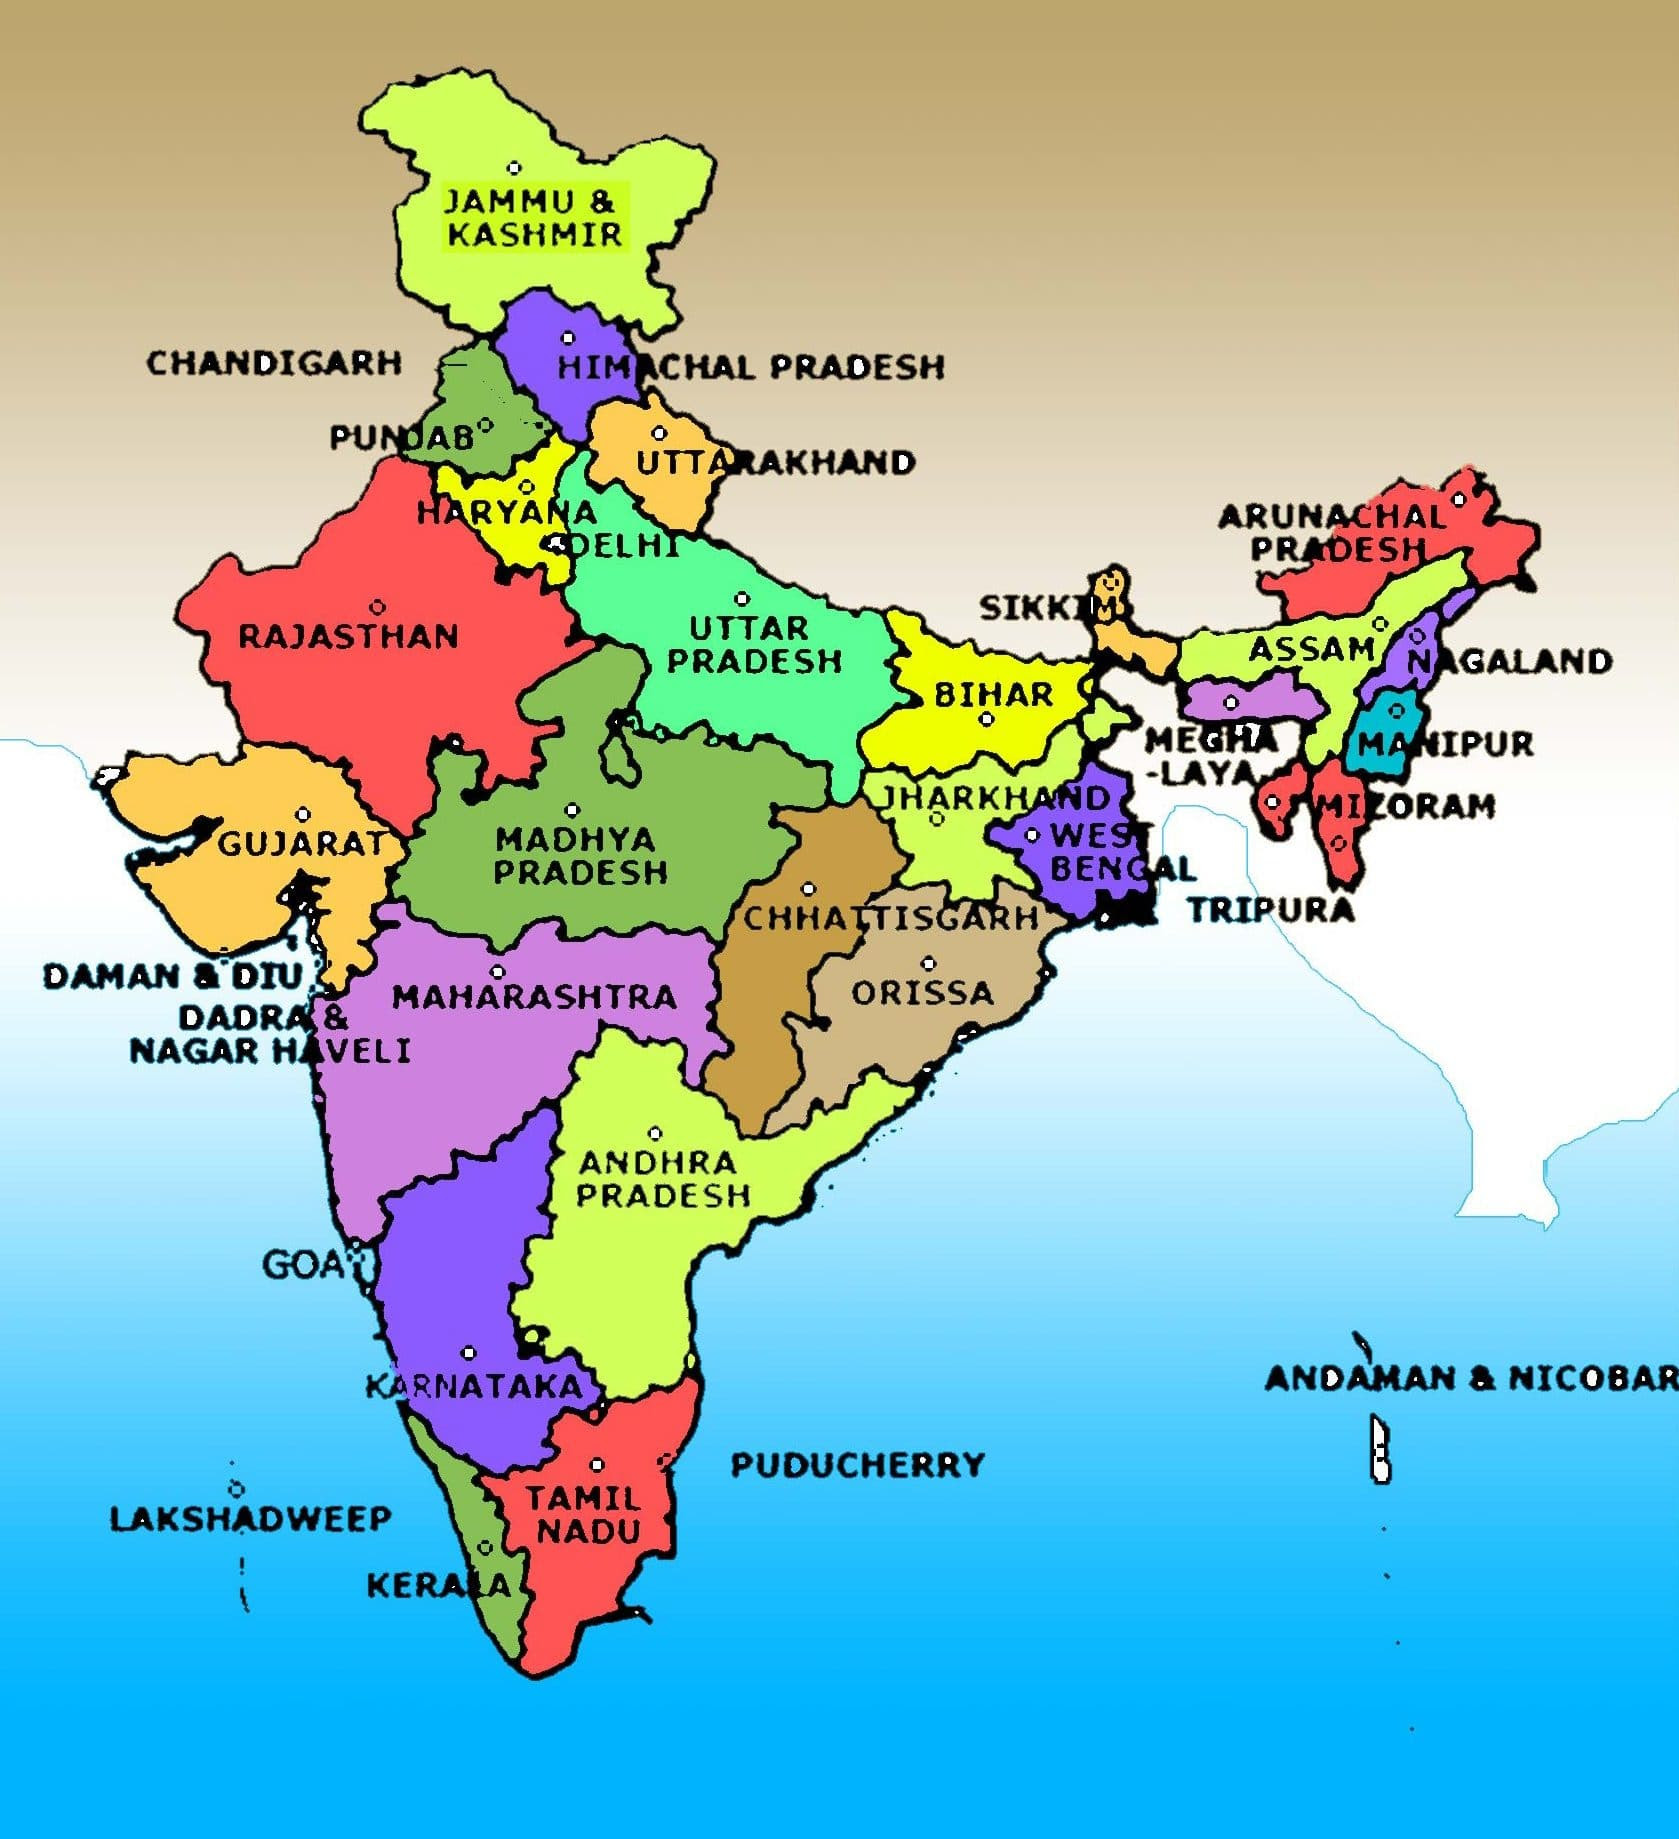 india map hd photo 25 New Indian Map Hd Image india map hd photo